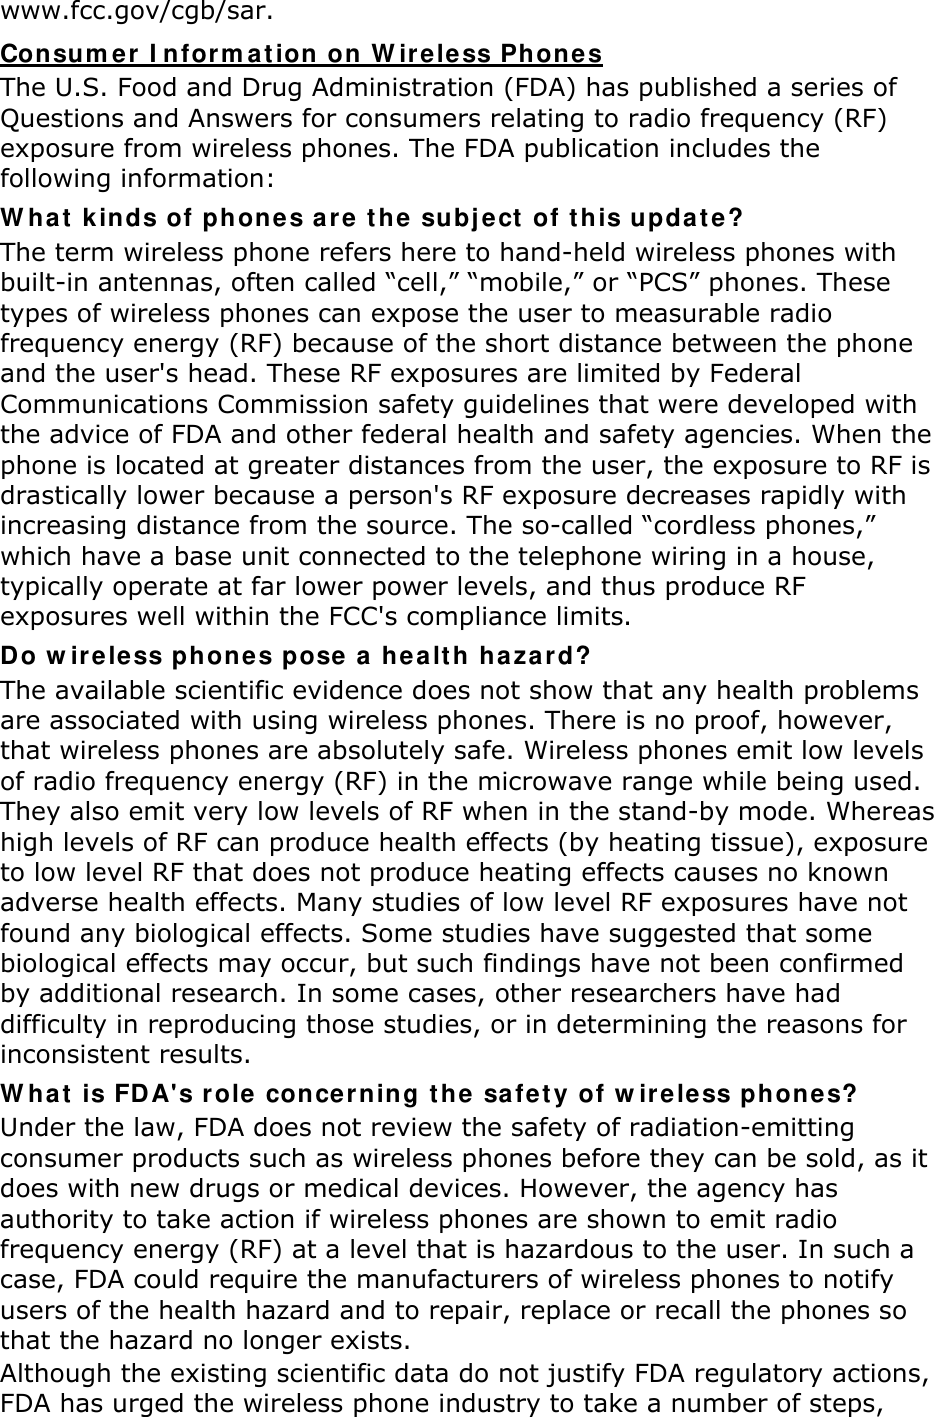 www.fcc.gov/cgb/sar. Consum er I nform ation on W irele ss Phone s The U.S. Food and Drug Administration (FDA) has published a series of Questions and Answers for consumers relating to radio frequency (RF) exposure from wireless phones. The FDA publication includes the following information: W ha t  kinds of phones are the subj e ct  of t his upda te? The term wireless phone refers here to hand-held wireless phones with built-in antennas, often called “cell,” “mobile,” or “PCS” phones. These types of wireless phones can expose the user to measurable radio frequency energy (RF) because of the short distance between the phone and the user&apos;s head. These RF exposures are limited by Federal Communications Commission safety guidelines that were developed with the advice of FDA and other federal health and safety agencies. When the phone is located at greater distances from the user, the exposure to RF is drastically lower because a person&apos;s RF exposure decreases rapidly with increasing distance from the source. The so-called “cordless phones,” which have a base unit connected to the telephone wiring in a house, typically operate at far lower power levels, and thus produce RF exposures well within the FCC&apos;s compliance limits. Do w ireless phone s pose  a healt h hazard? The available scientific evidence does not show that any health problems are associated with using wireless phones. There is no proof, however, that wireless phones are absolutely safe. Wireless phones emit low levels of radio frequency energy (RF) in the microwave range while being used. They also emit very low levels of RF when in the stand-by mode. Whereas high levels of RF can produce health effects (by heating tissue), exposure to low level RF that does not produce heating effects causes no known adverse health effects. Many studies of low level RF exposures have not found any biological effects. Some studies have suggested that some biological effects may occur, but such findings have not been confirmed by additional research. In some cases, other researchers have had difficulty in reproducing those studies, or in determining the reasons for inconsistent results. W ha t  is FDA&apos;s role conce rning t he safe ty of w irele ss phones? Under the law, FDA does not review the safety of radiation-emitting consumer products such as wireless phones before they can be sold, as it does with new drugs or medical devices. However, the agency has authority to take action if wireless phones are shown to emit radio frequency energy (RF) at a level that is hazardous to the user. In such a case, FDA could require the manufacturers of wireless phones to notify users of the health hazard and to repair, replace or recall the phones so that the hazard no longer exists. Although the existing scientific data do not justify FDA regulatory actions, FDA has urged the wireless phone industry to take a number of steps, 